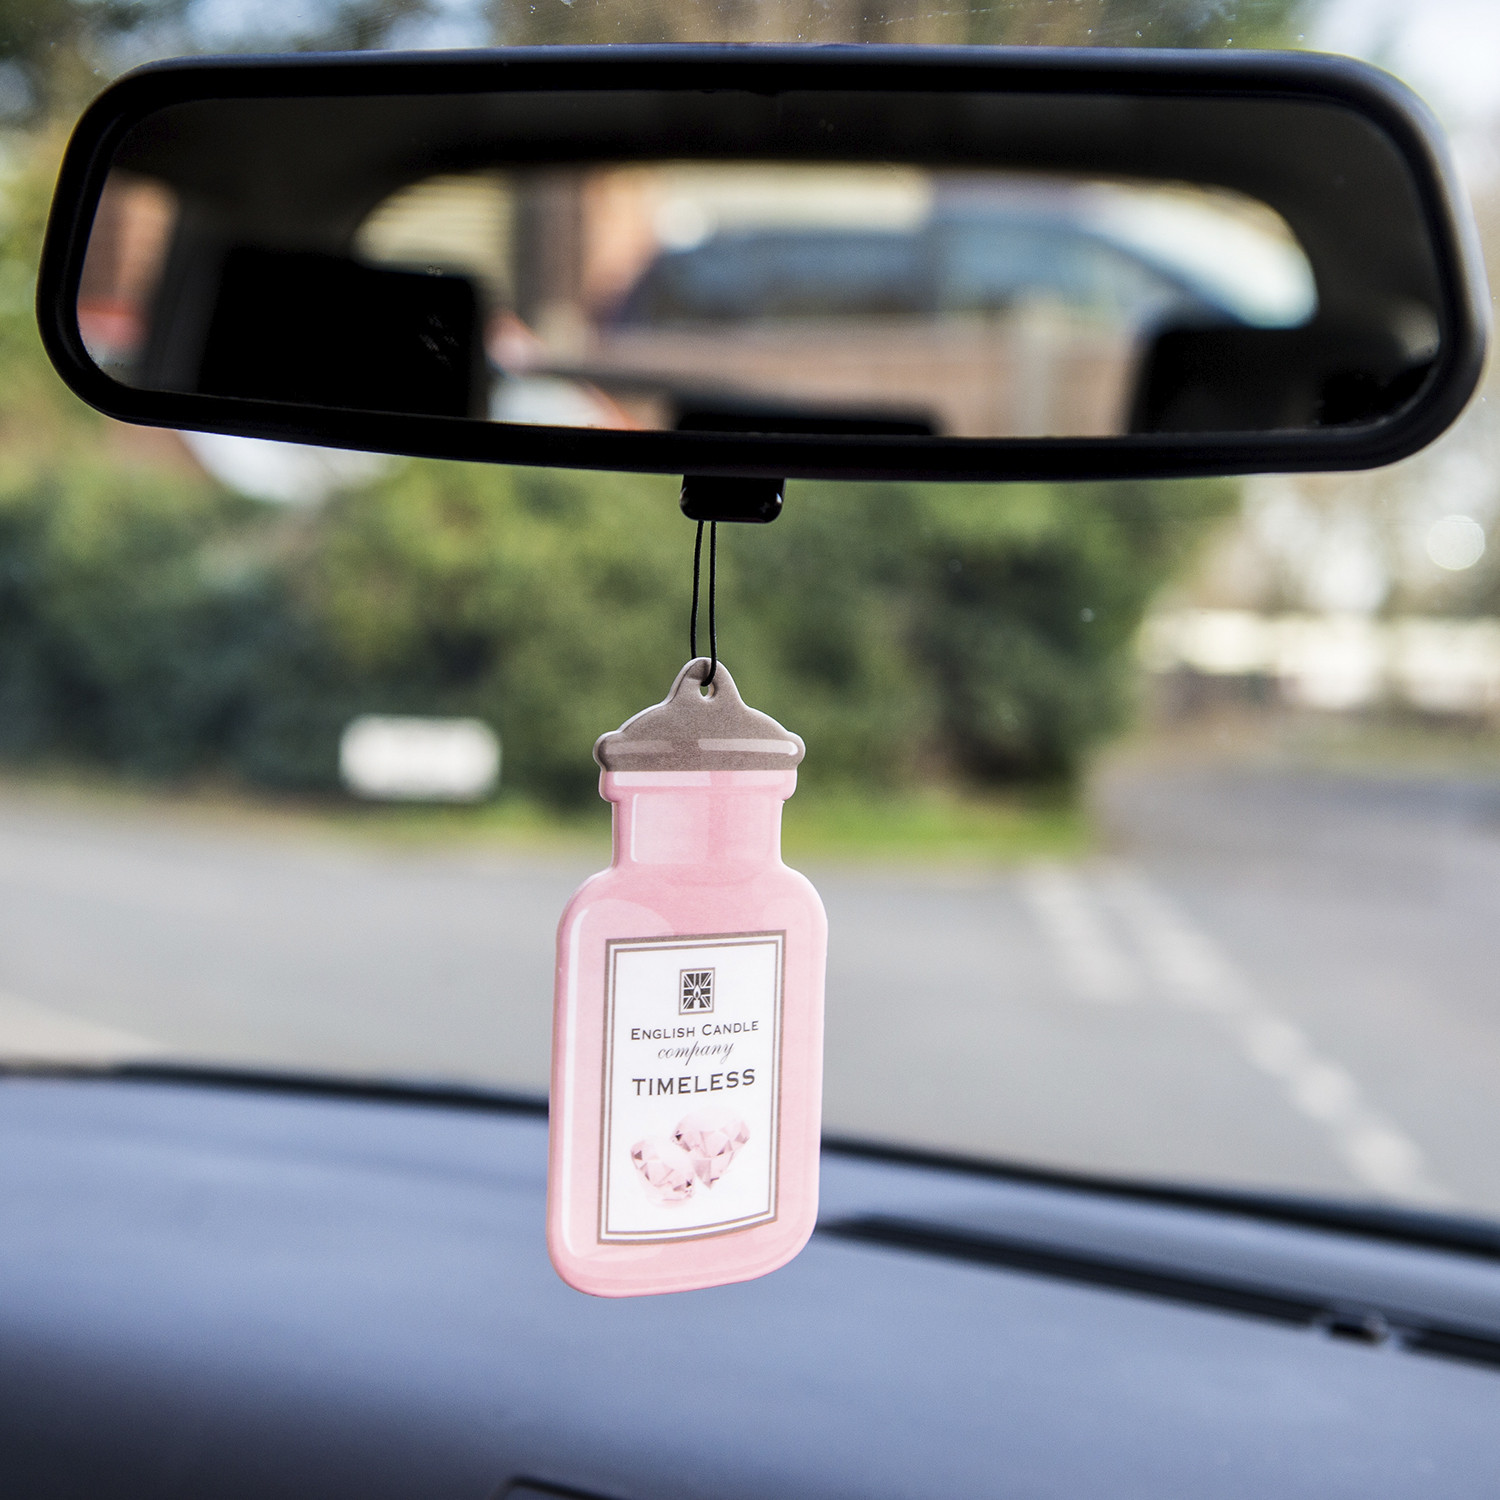 English Candle Company Timeless 2D Car Air Freshener Image 2